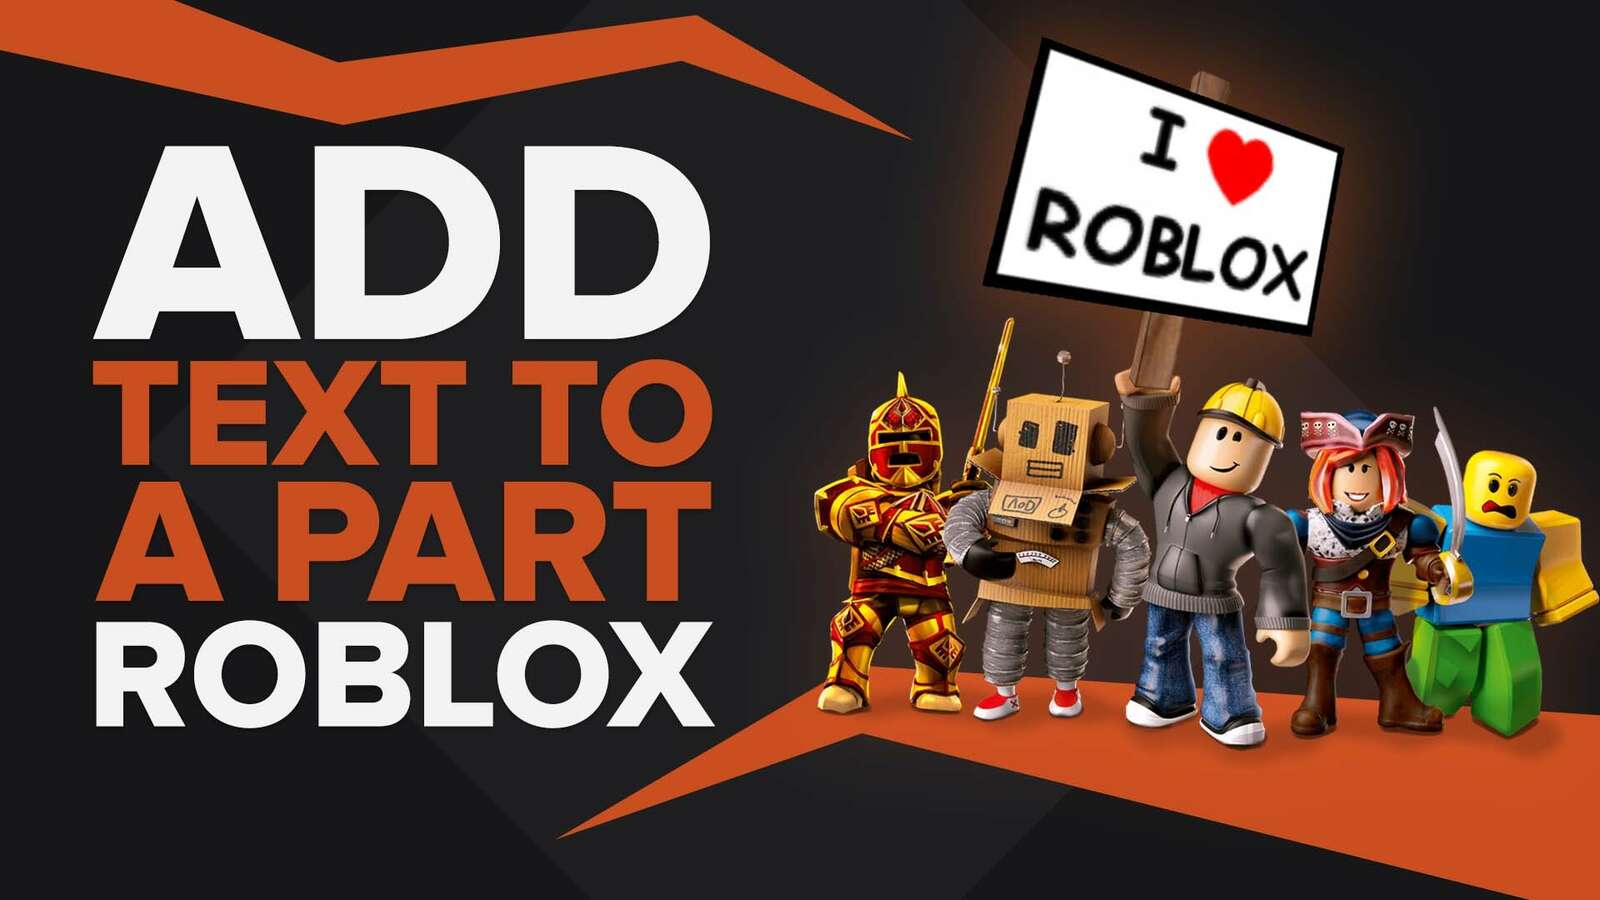 How to Add Text to a Part in Roblox (Step-by-Step Guide)